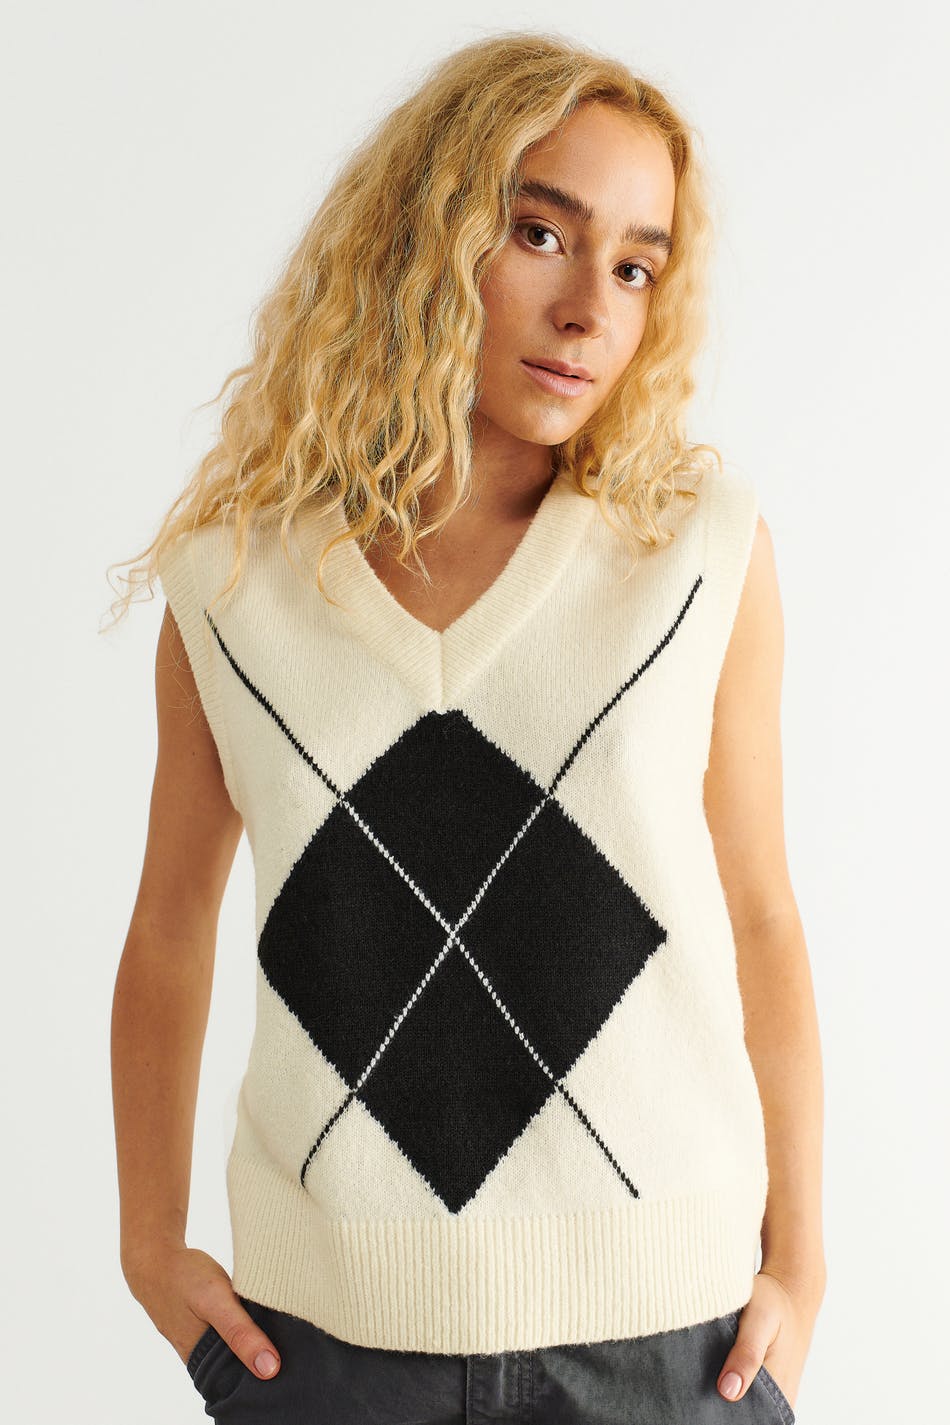 ginatricot.com | Carla knitted vest